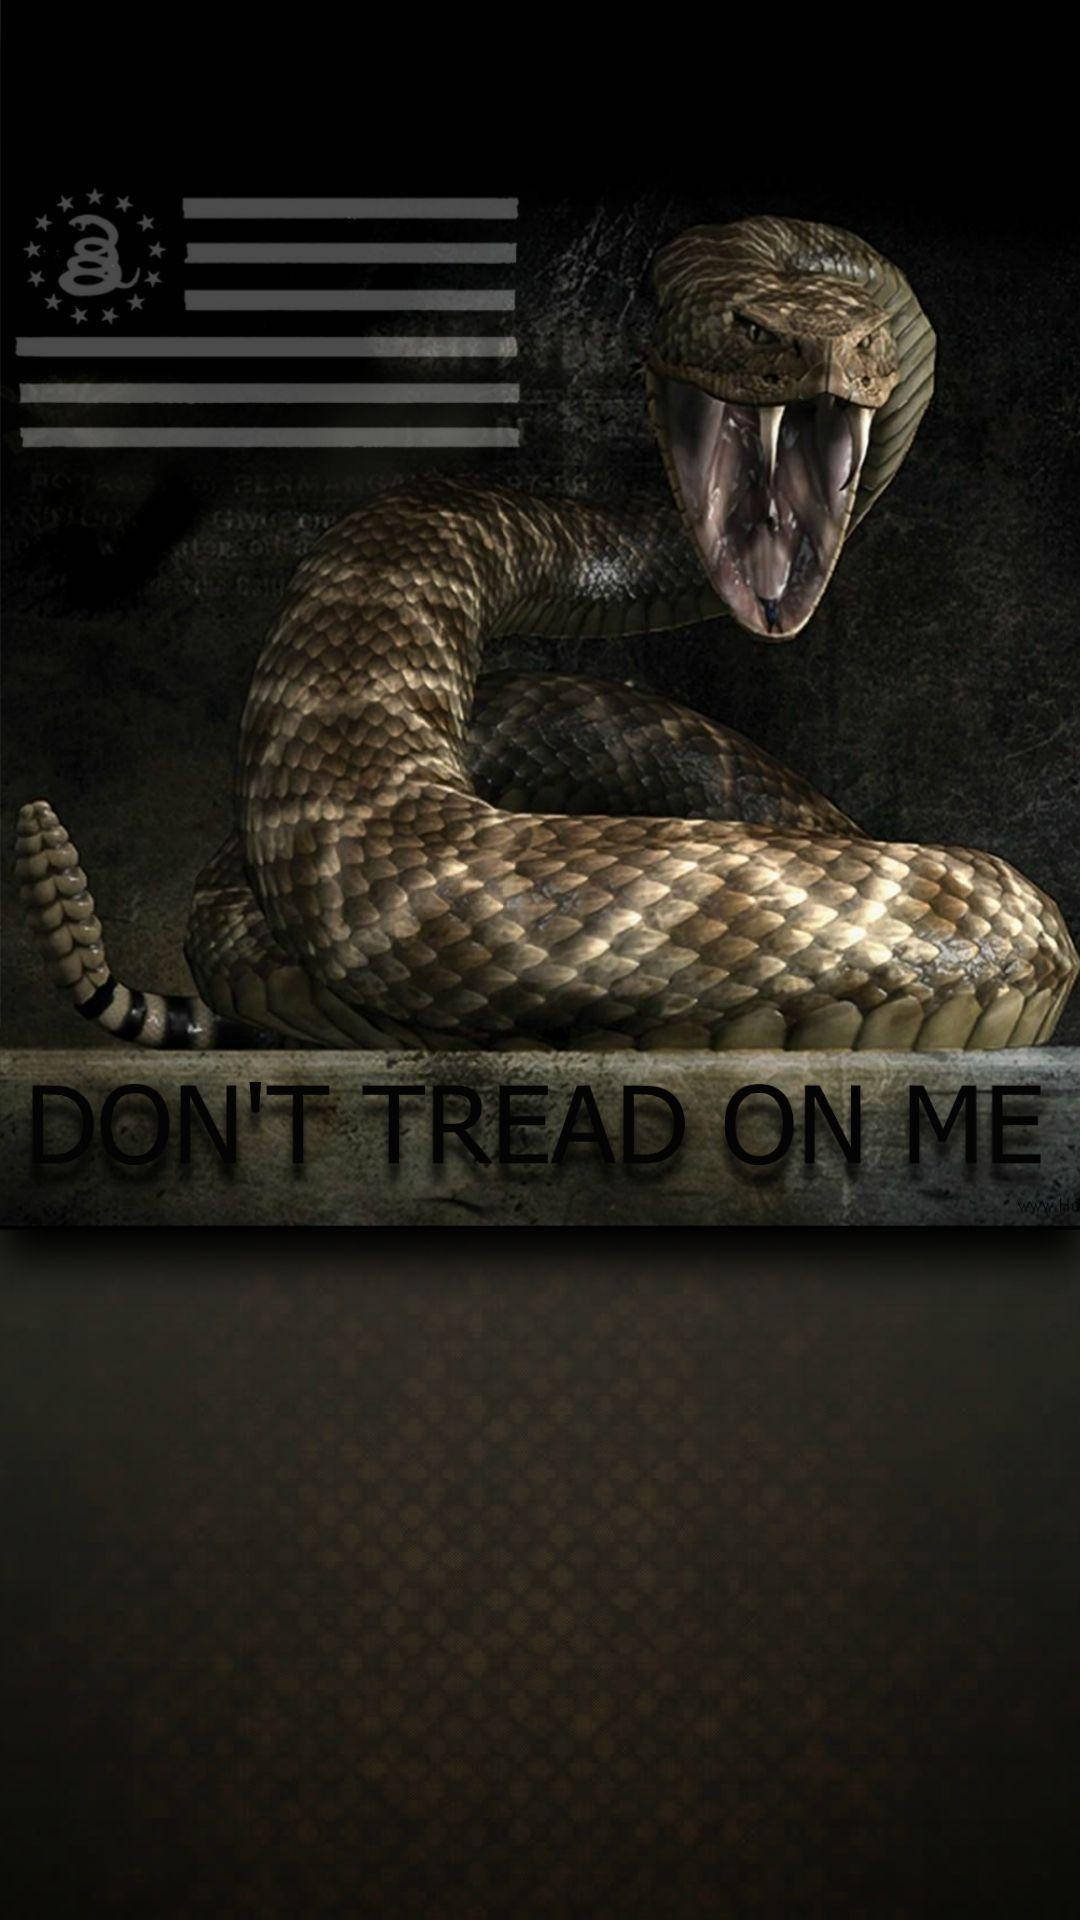 Since everyone is posting flags I thought Id show this rough Gadsden flag  I made with a phone wallpaper  rUSMonarchy